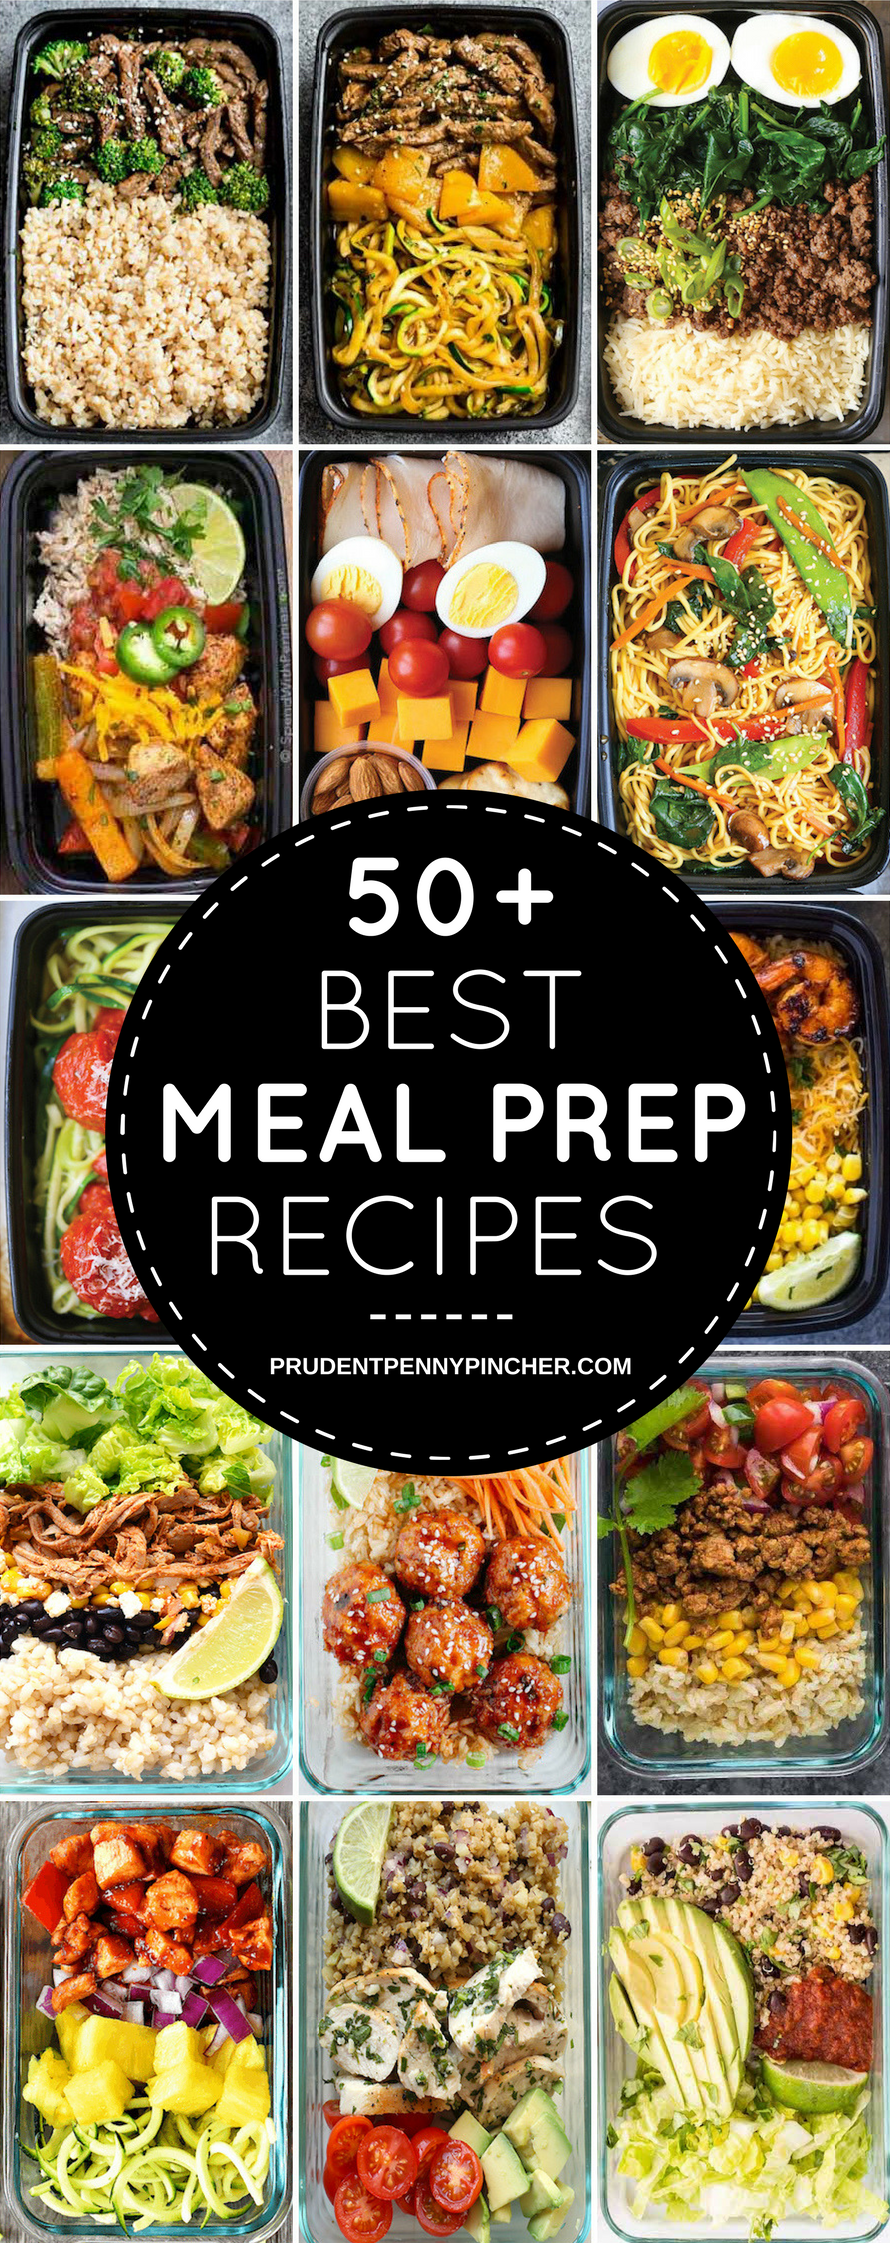 50 Best Meal Prep Recipes - Prudent Penny Pincher